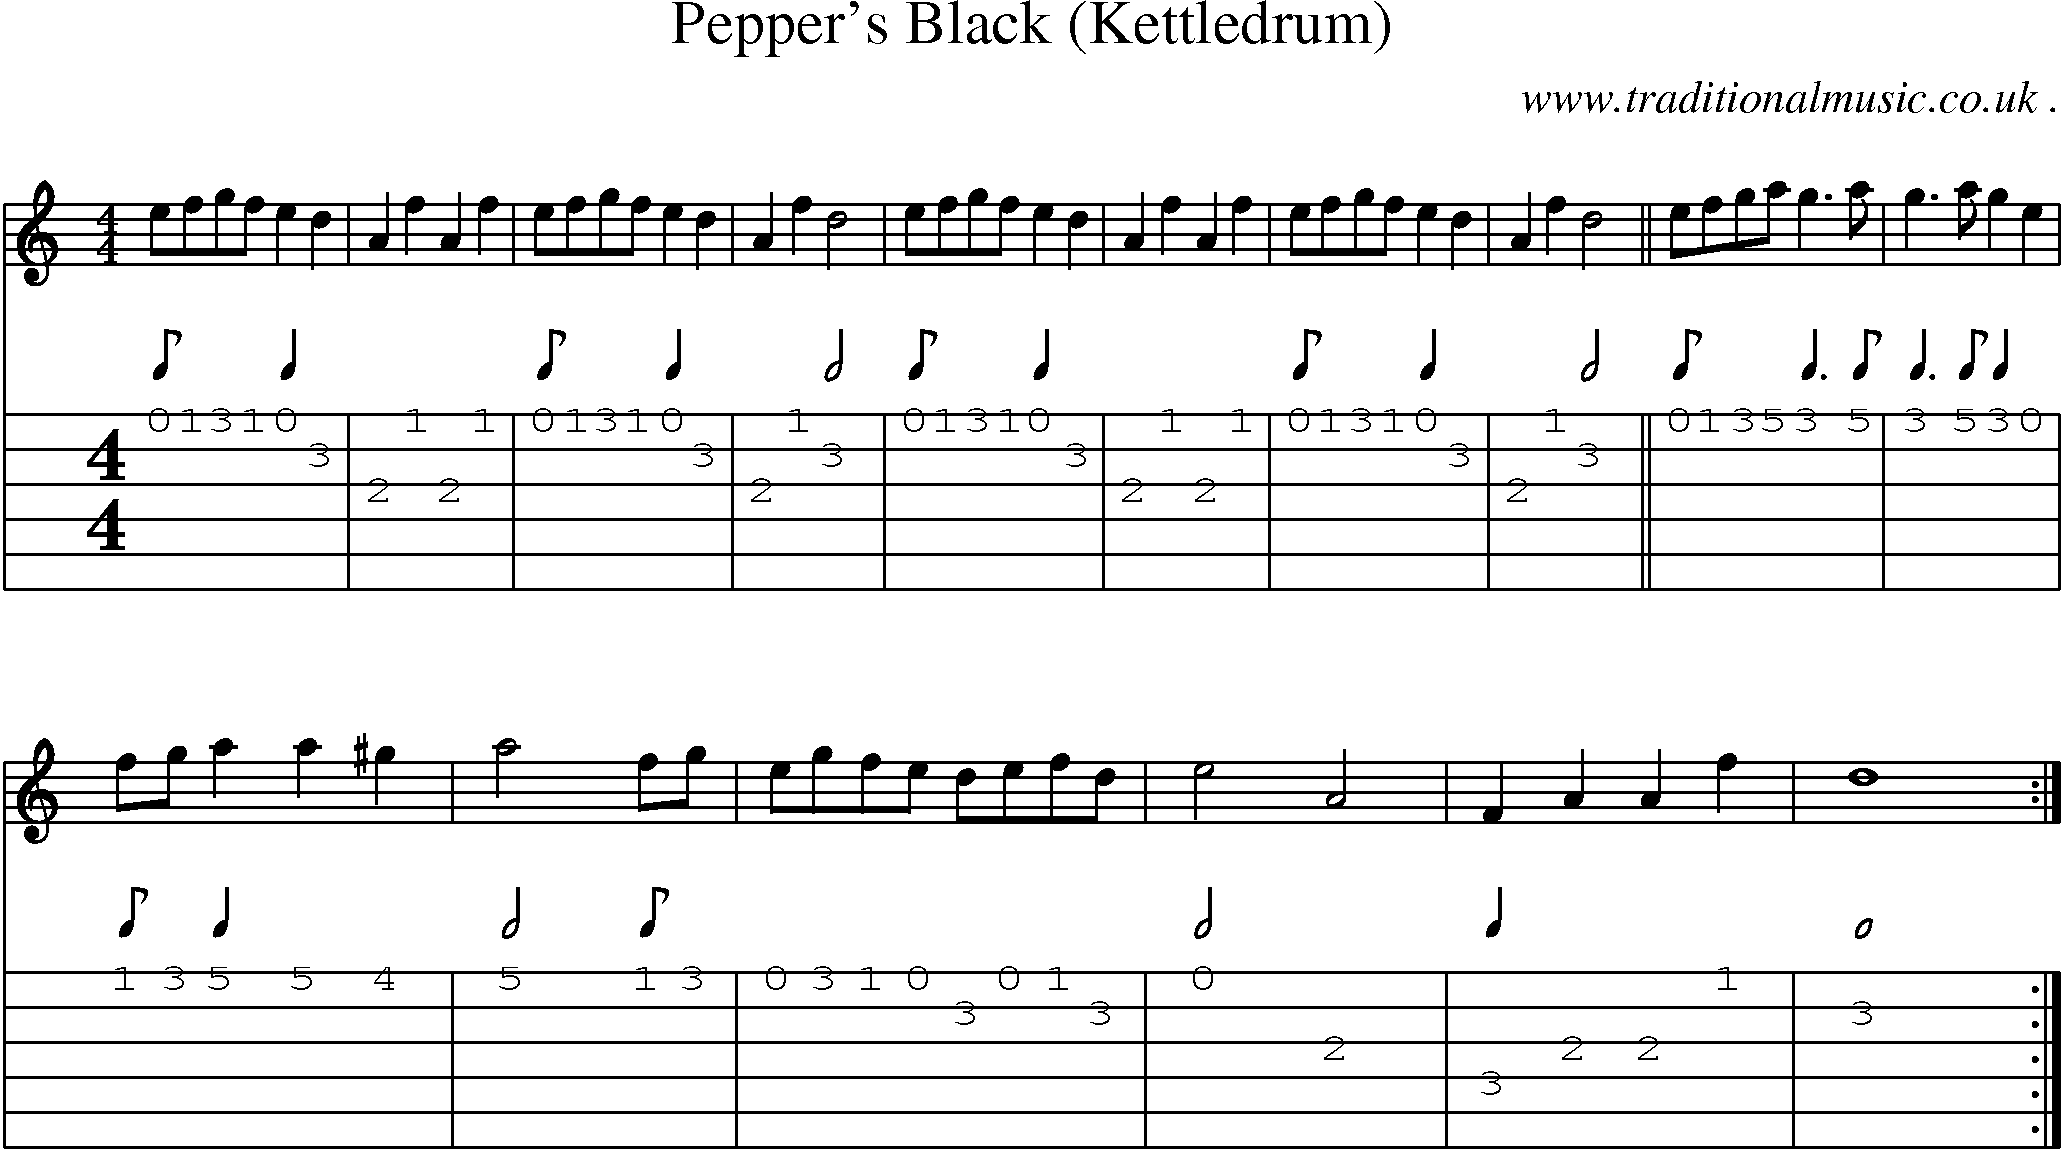 Sheet-Music and Guitar Tabs for Peppers Black (kettledrum)